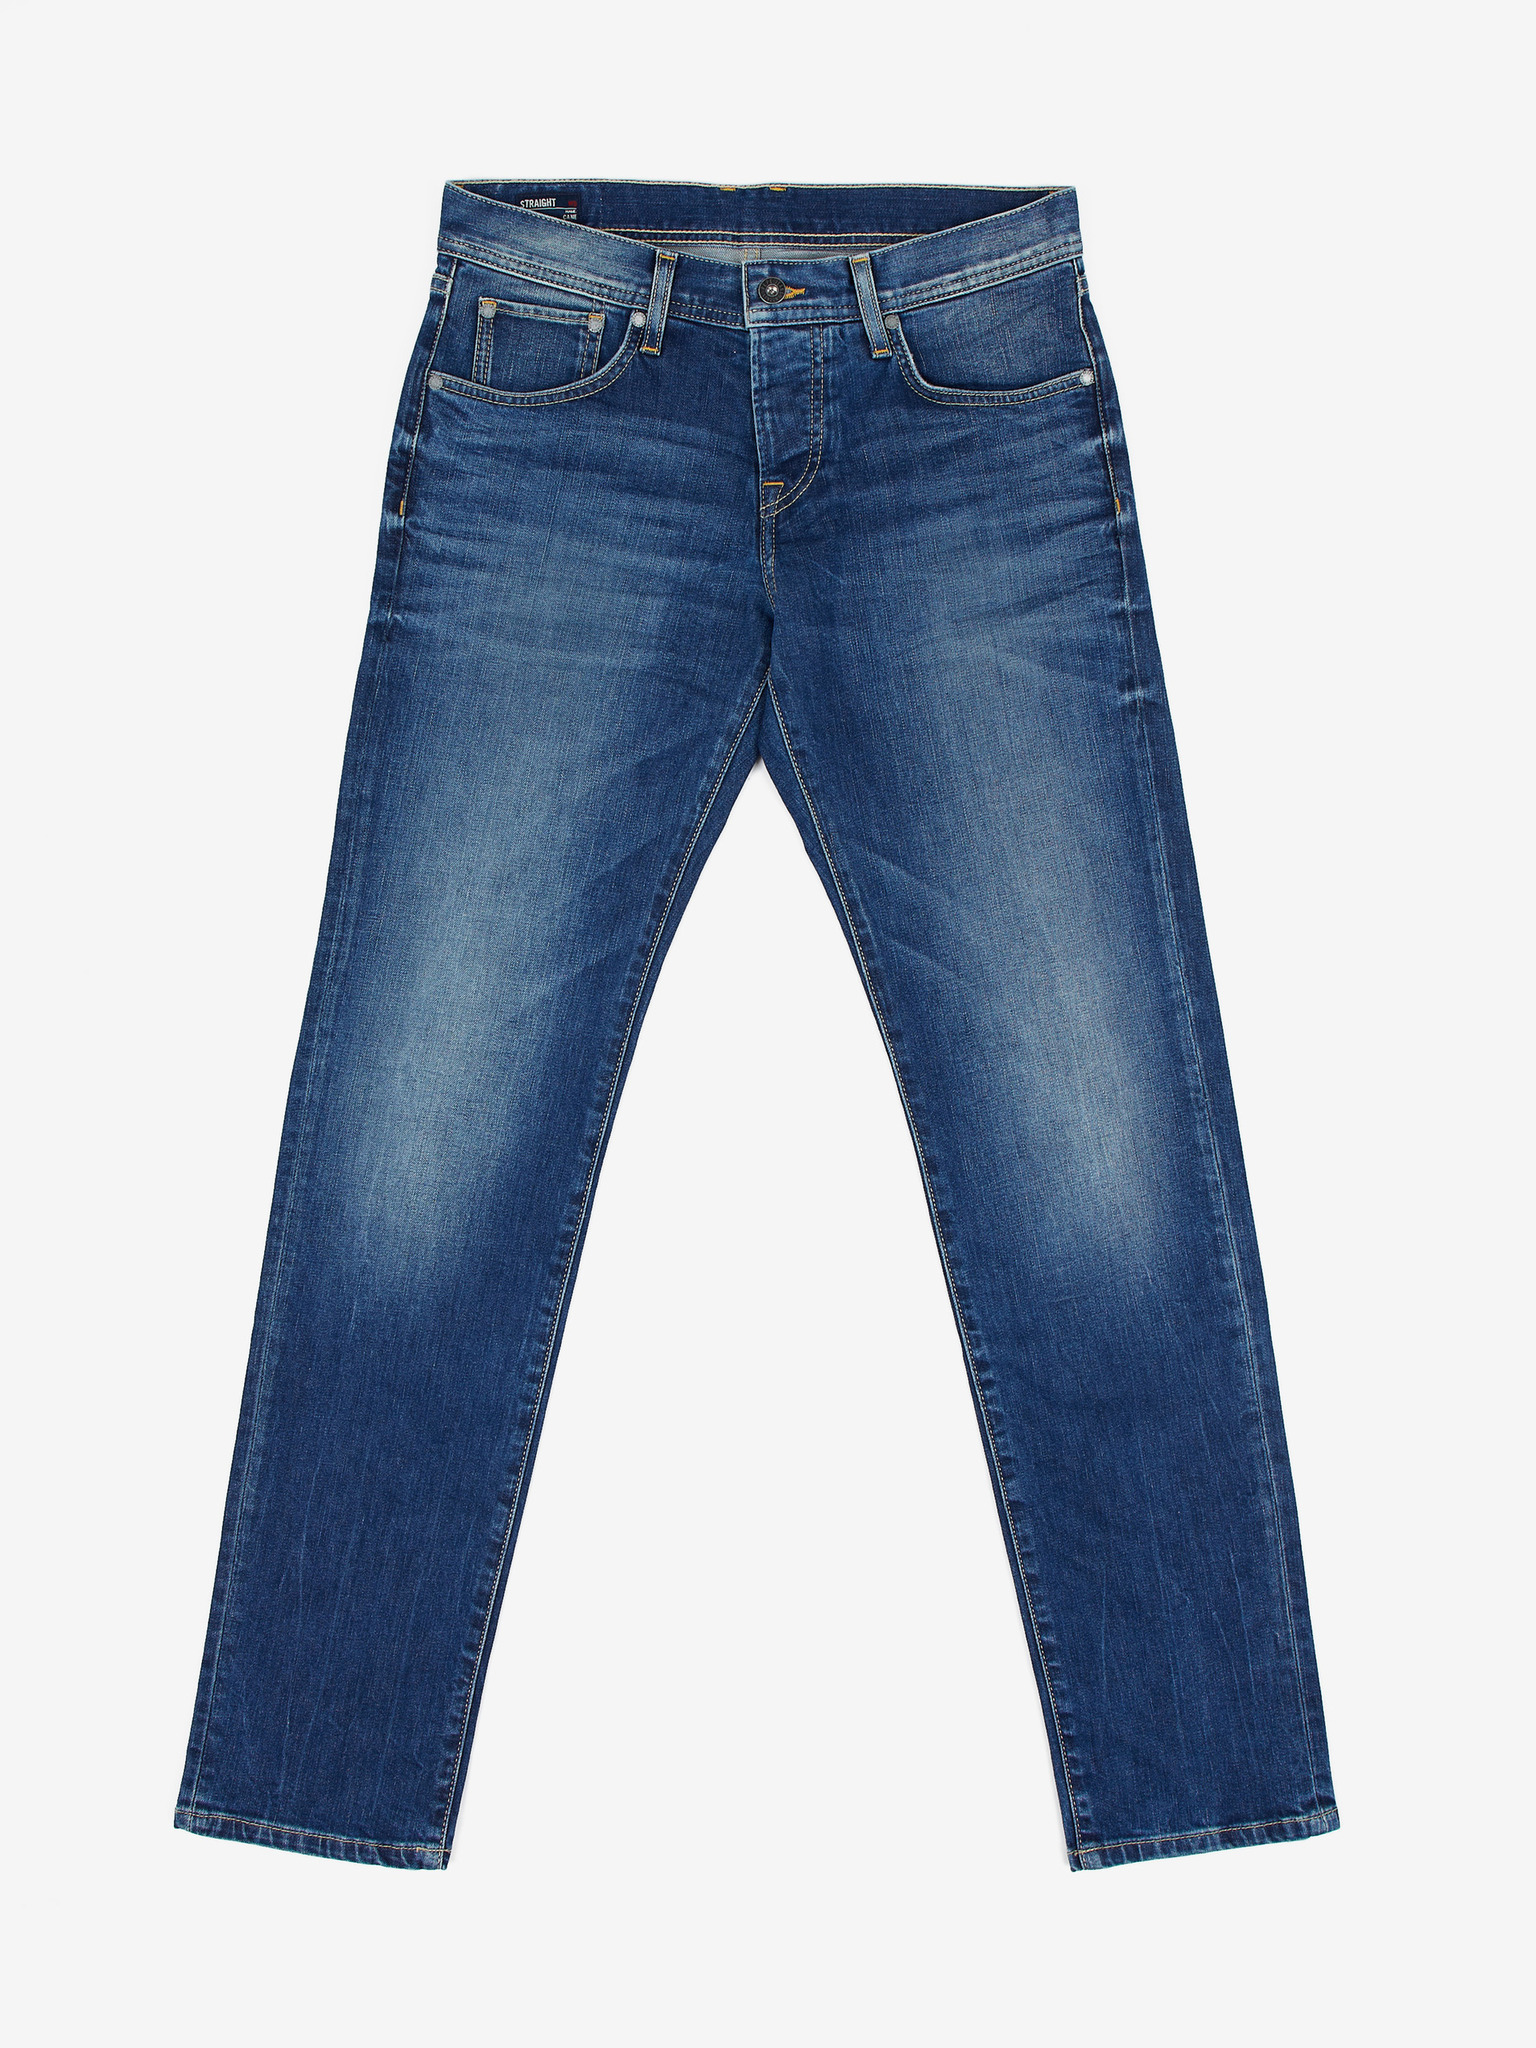 Cane Jeans Pepe Jeans